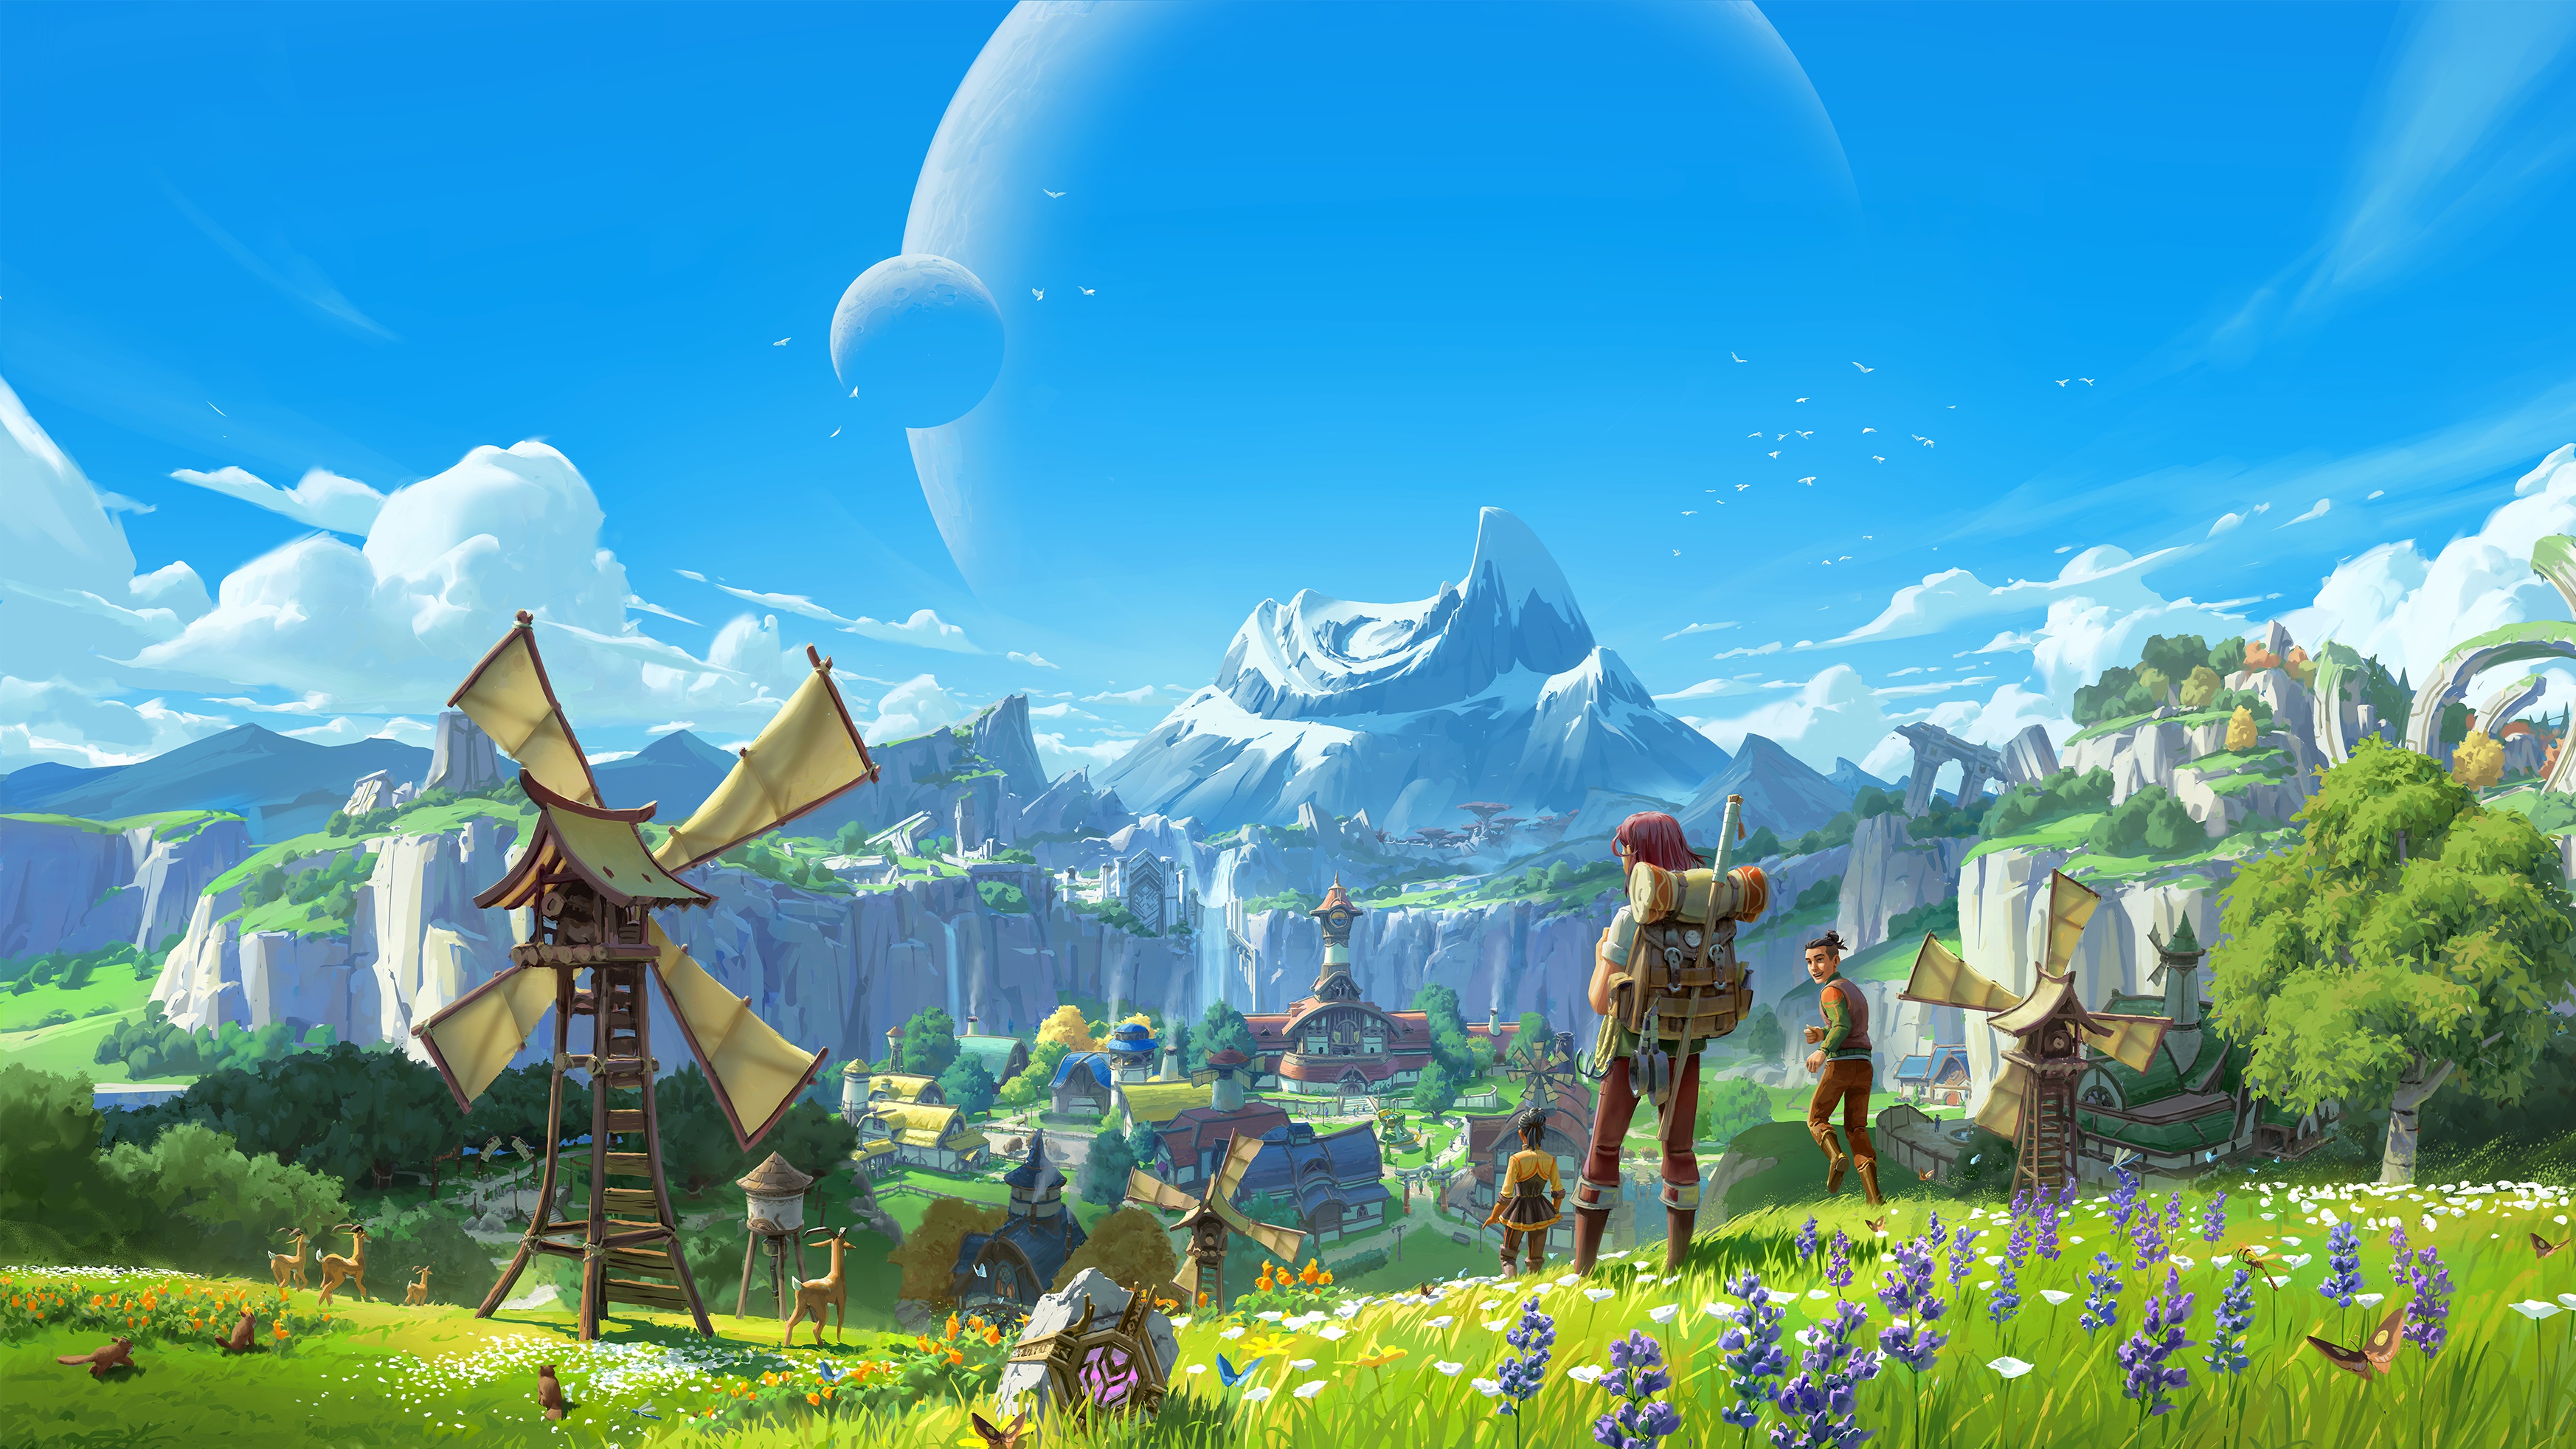 Palia key art - a grassy plain with a mountain in the background where a character stands with a backpack in front of a windmill